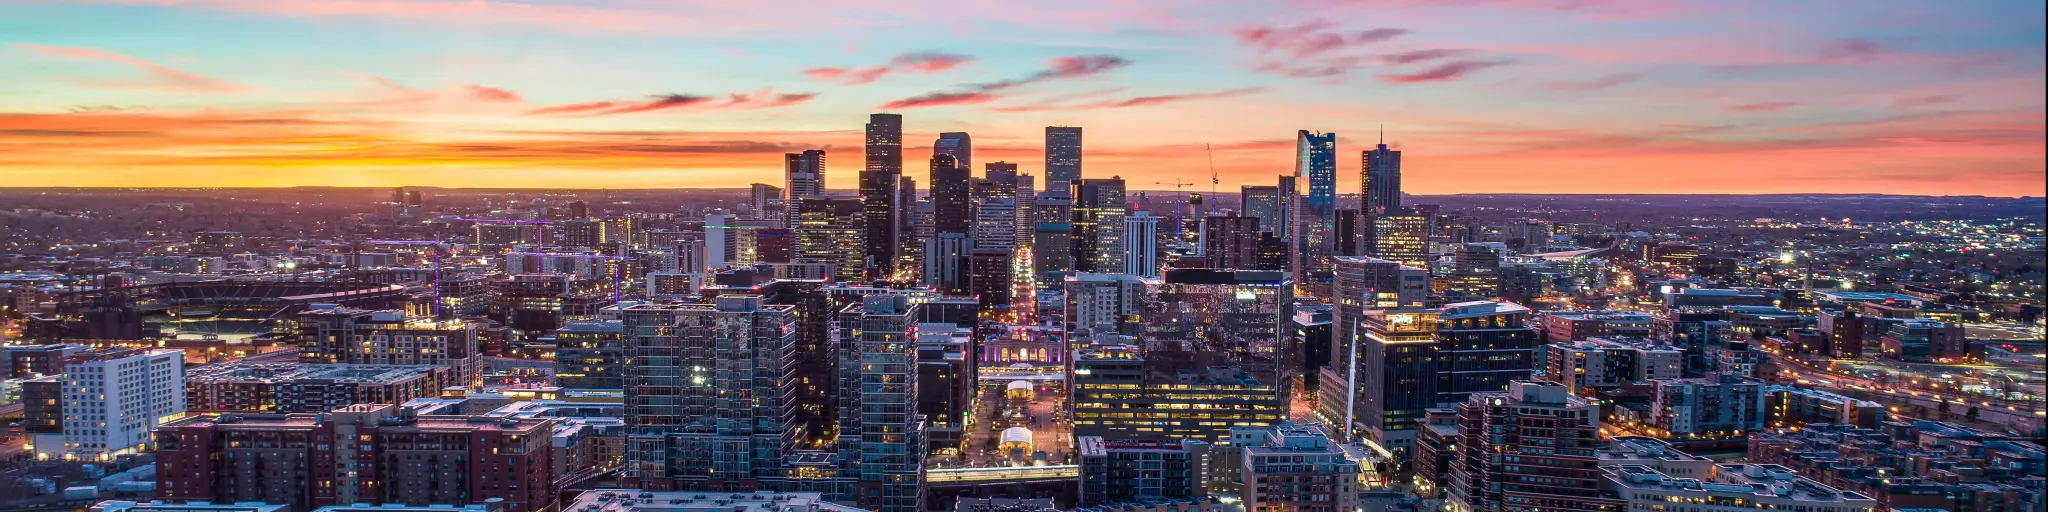 Downtown Denver, Colorado, USA. Drone skyline aerial panorama. The photo is taken at sunset and depicts a colorful sky behind the city skyline.